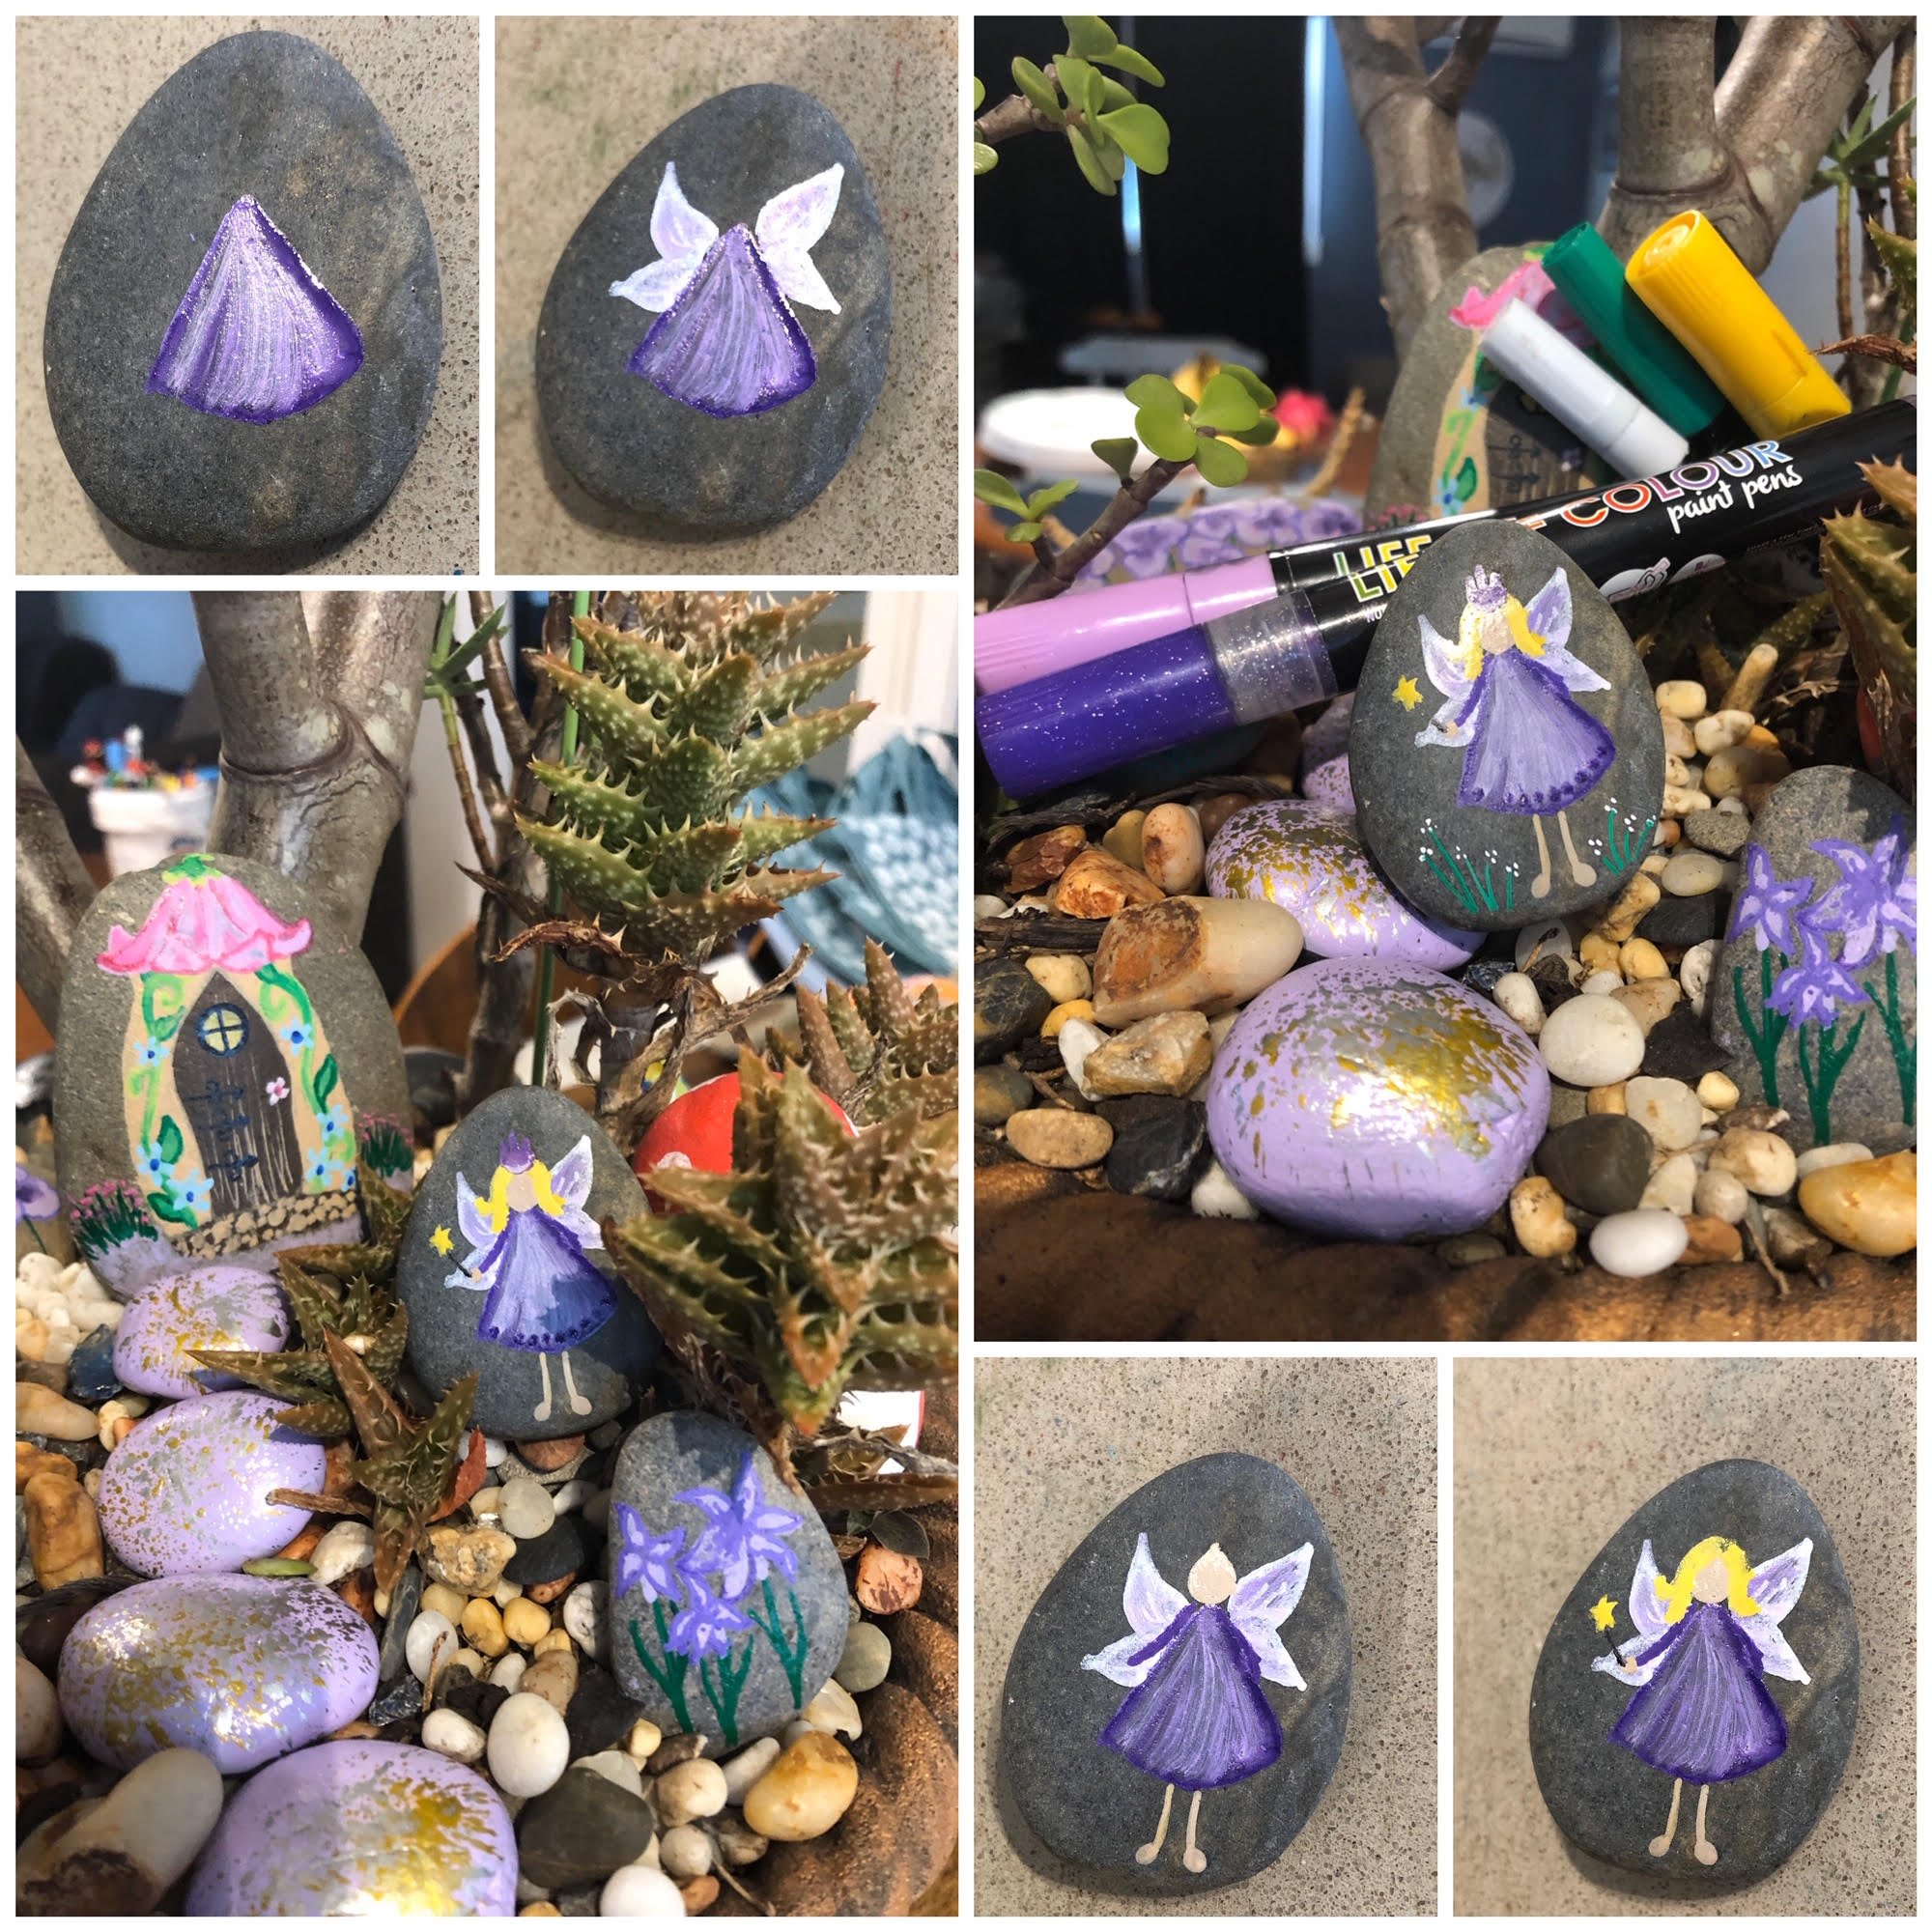 Best Paint for Rocks! - The Graphics Fairy